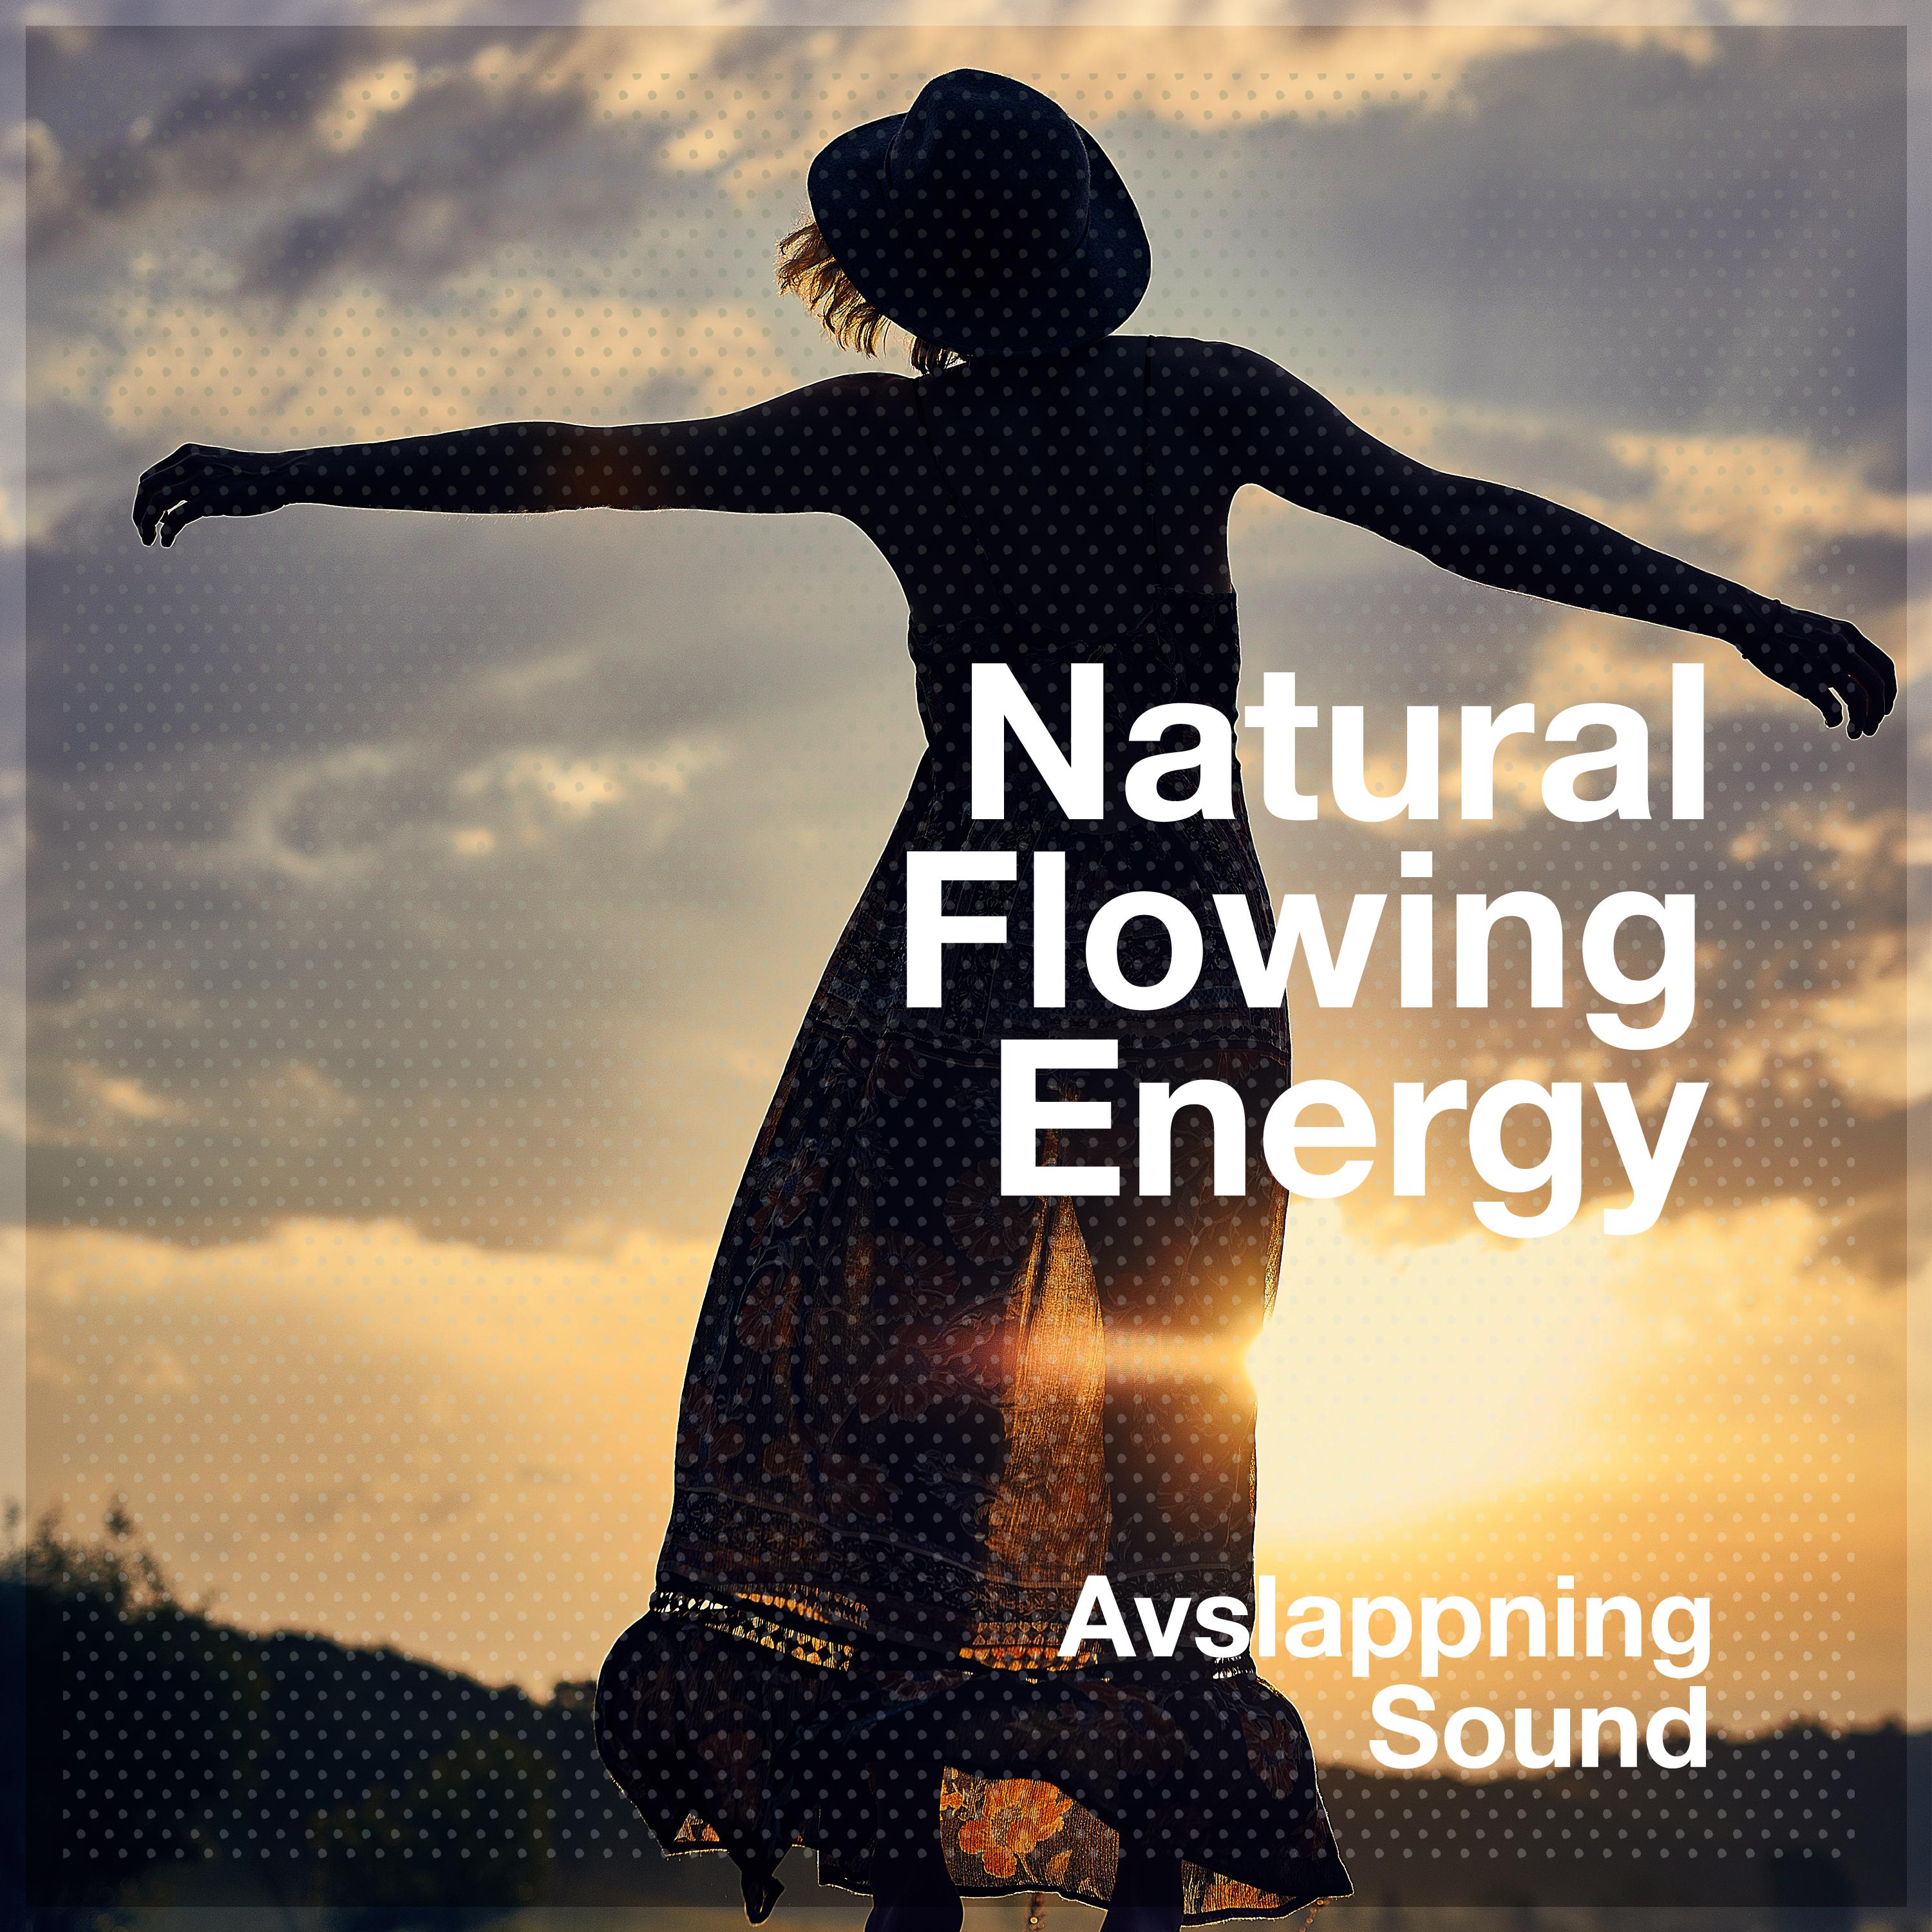 Natural Flowing Energy